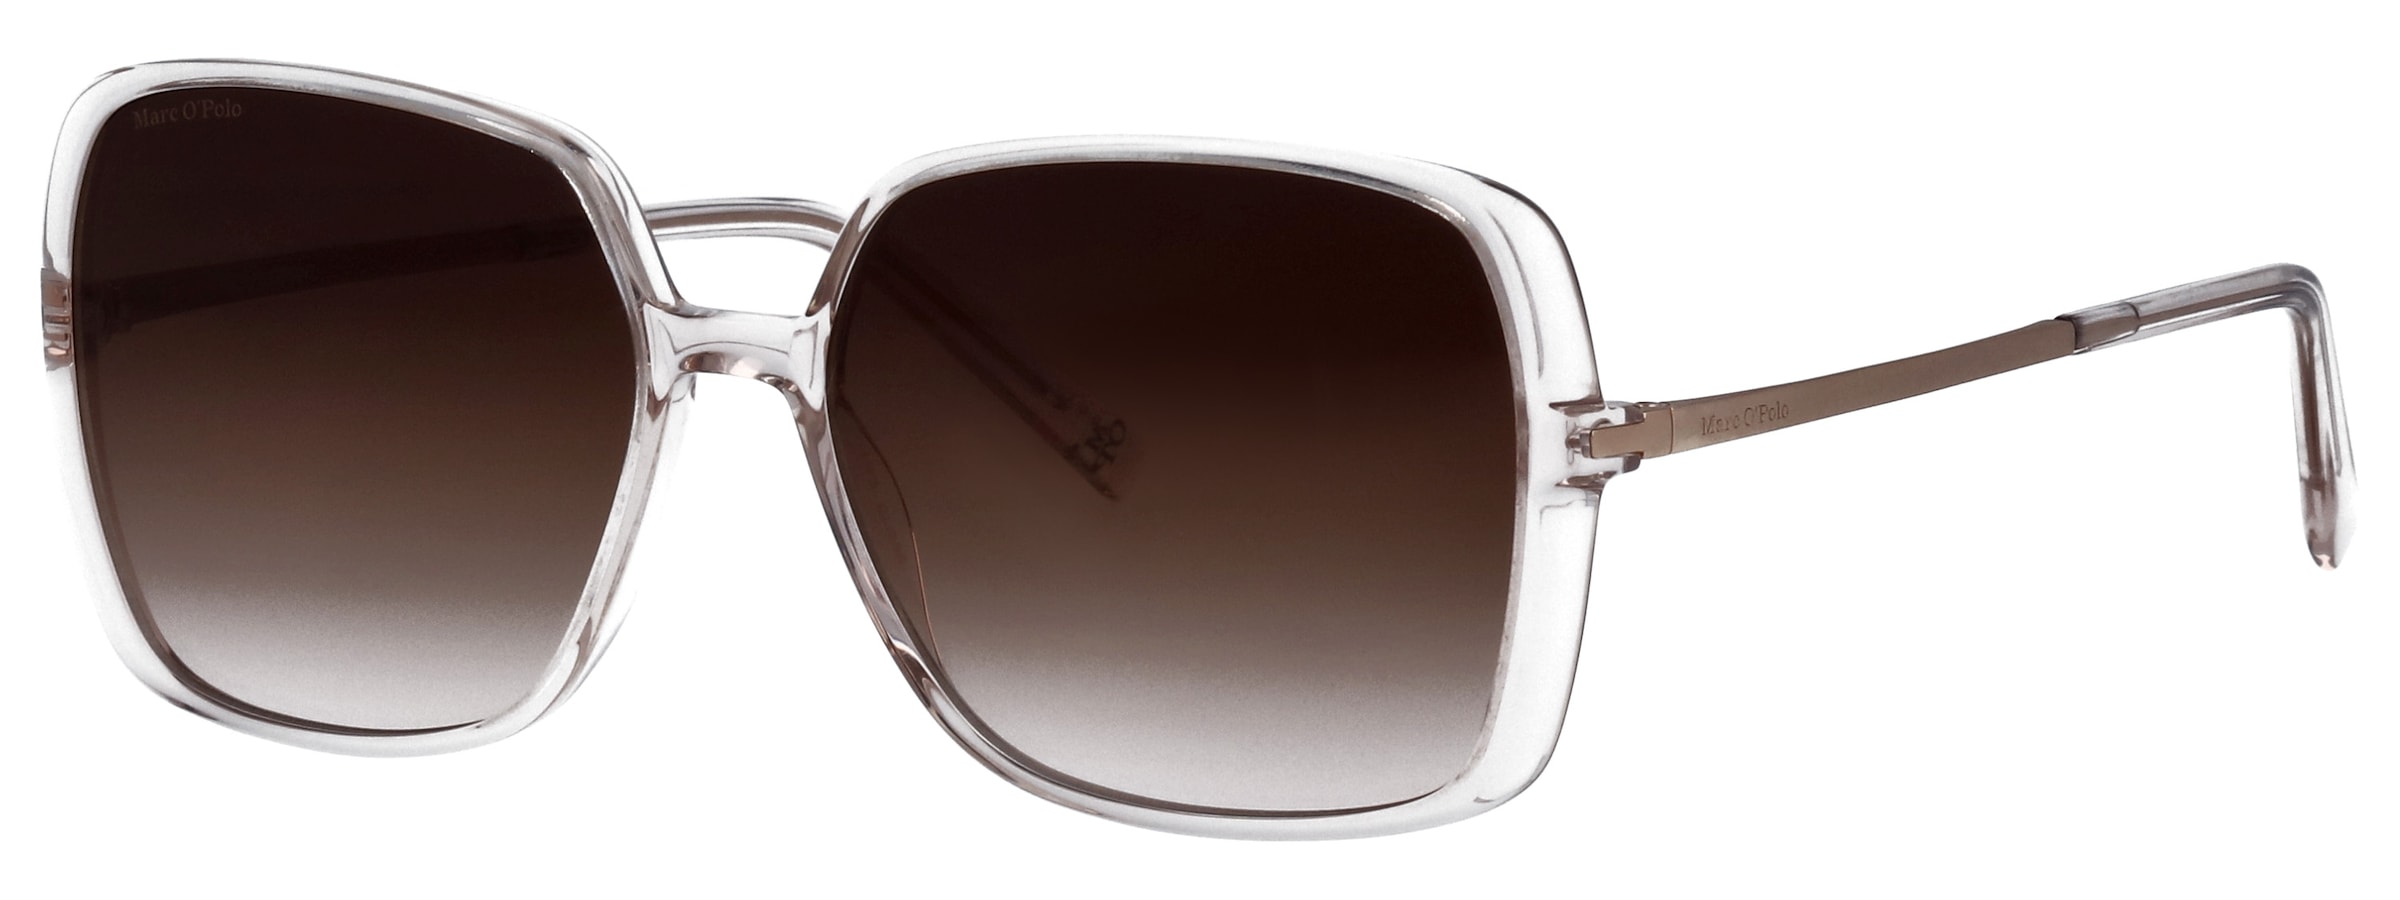 Marc O'Polo Sonnenbrille »Modell 506190«, Karree-From